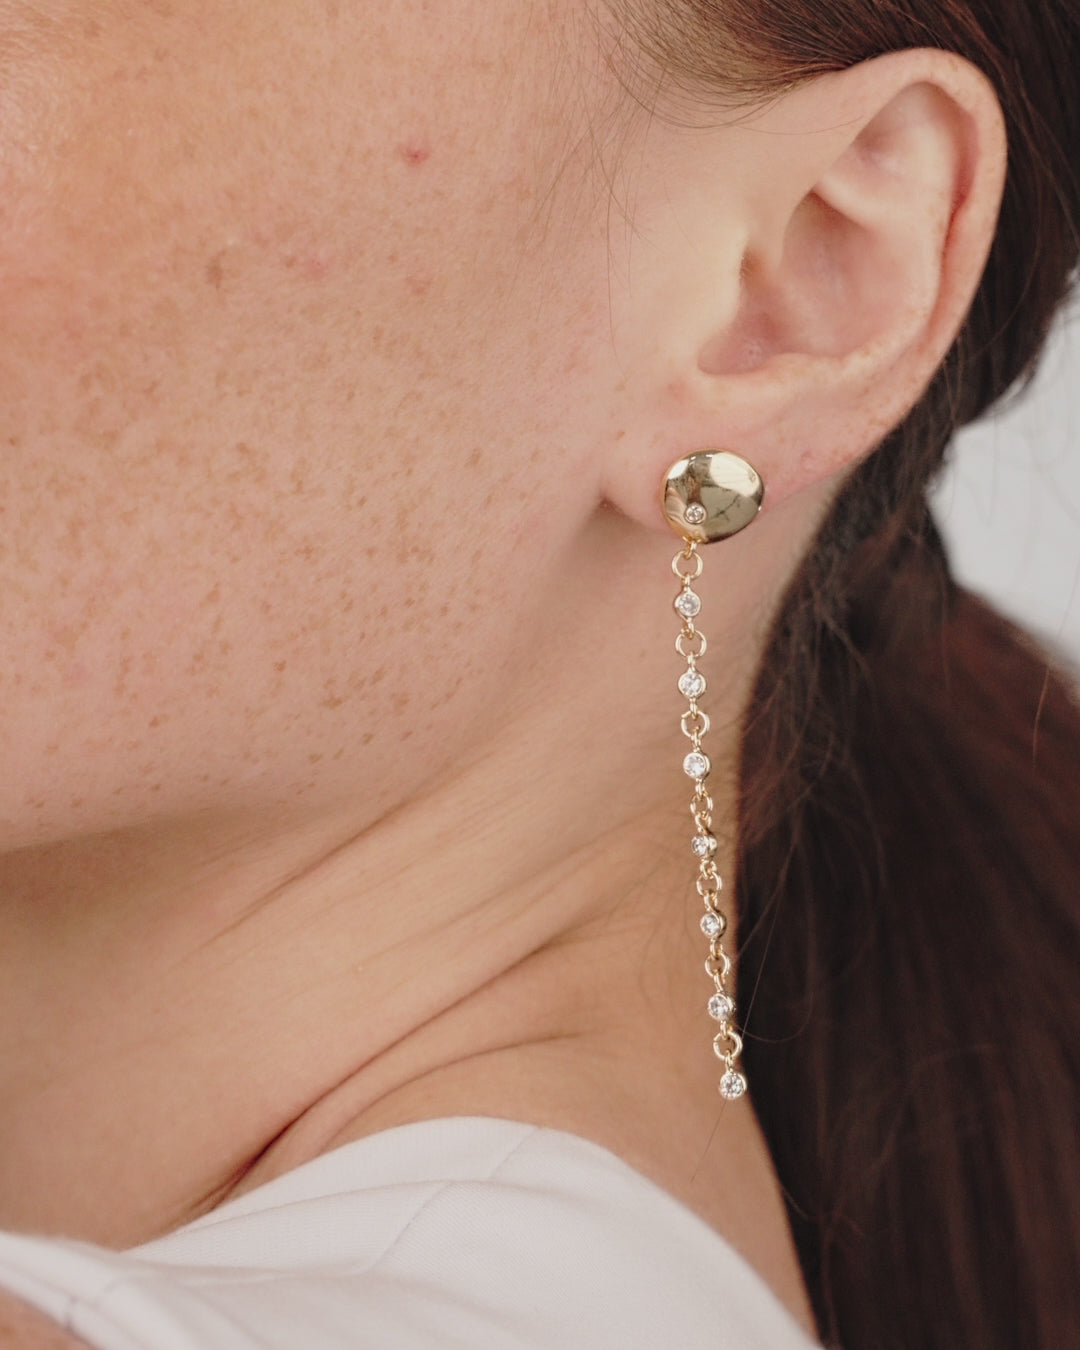 Polished Pebble Linear Crystal Chain Drop Earrings in gold on model in video